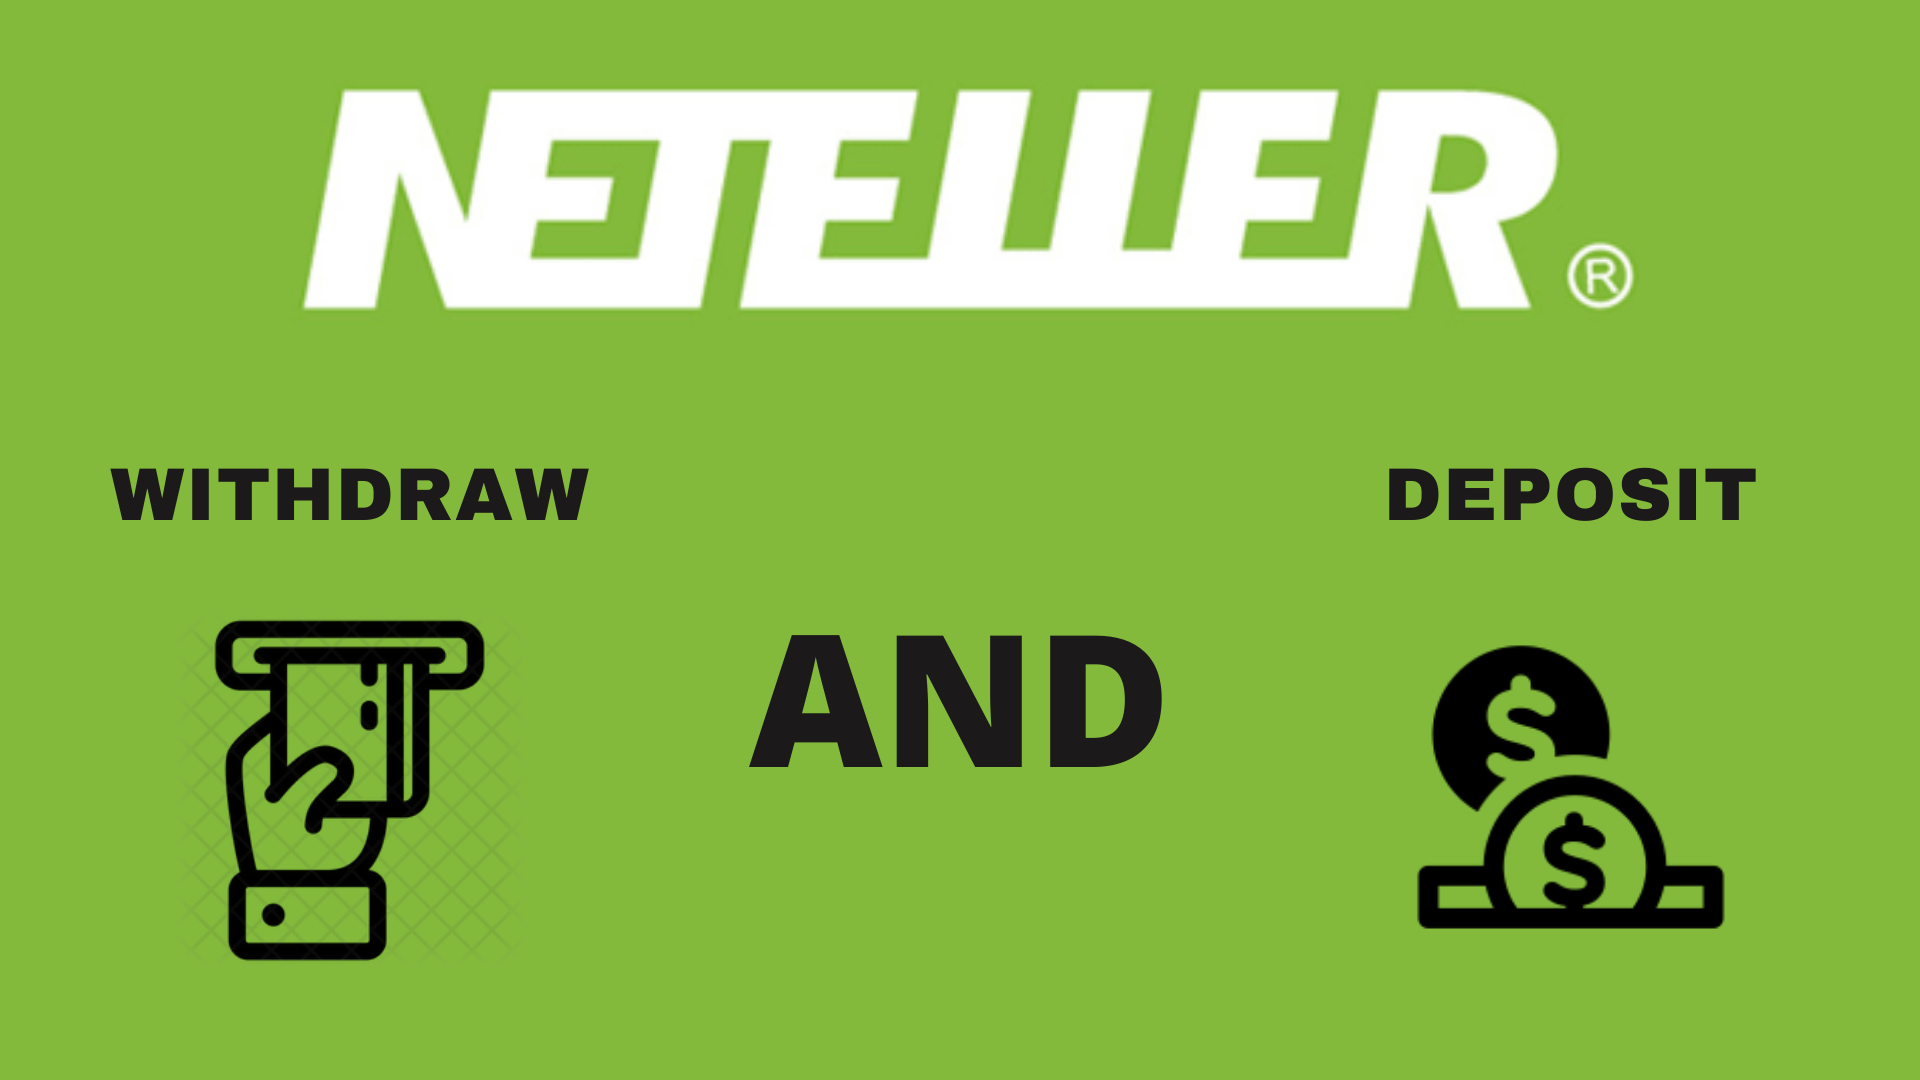 How to Create Neteller Account? How to Deposit and Withdraw from Neteller Account?